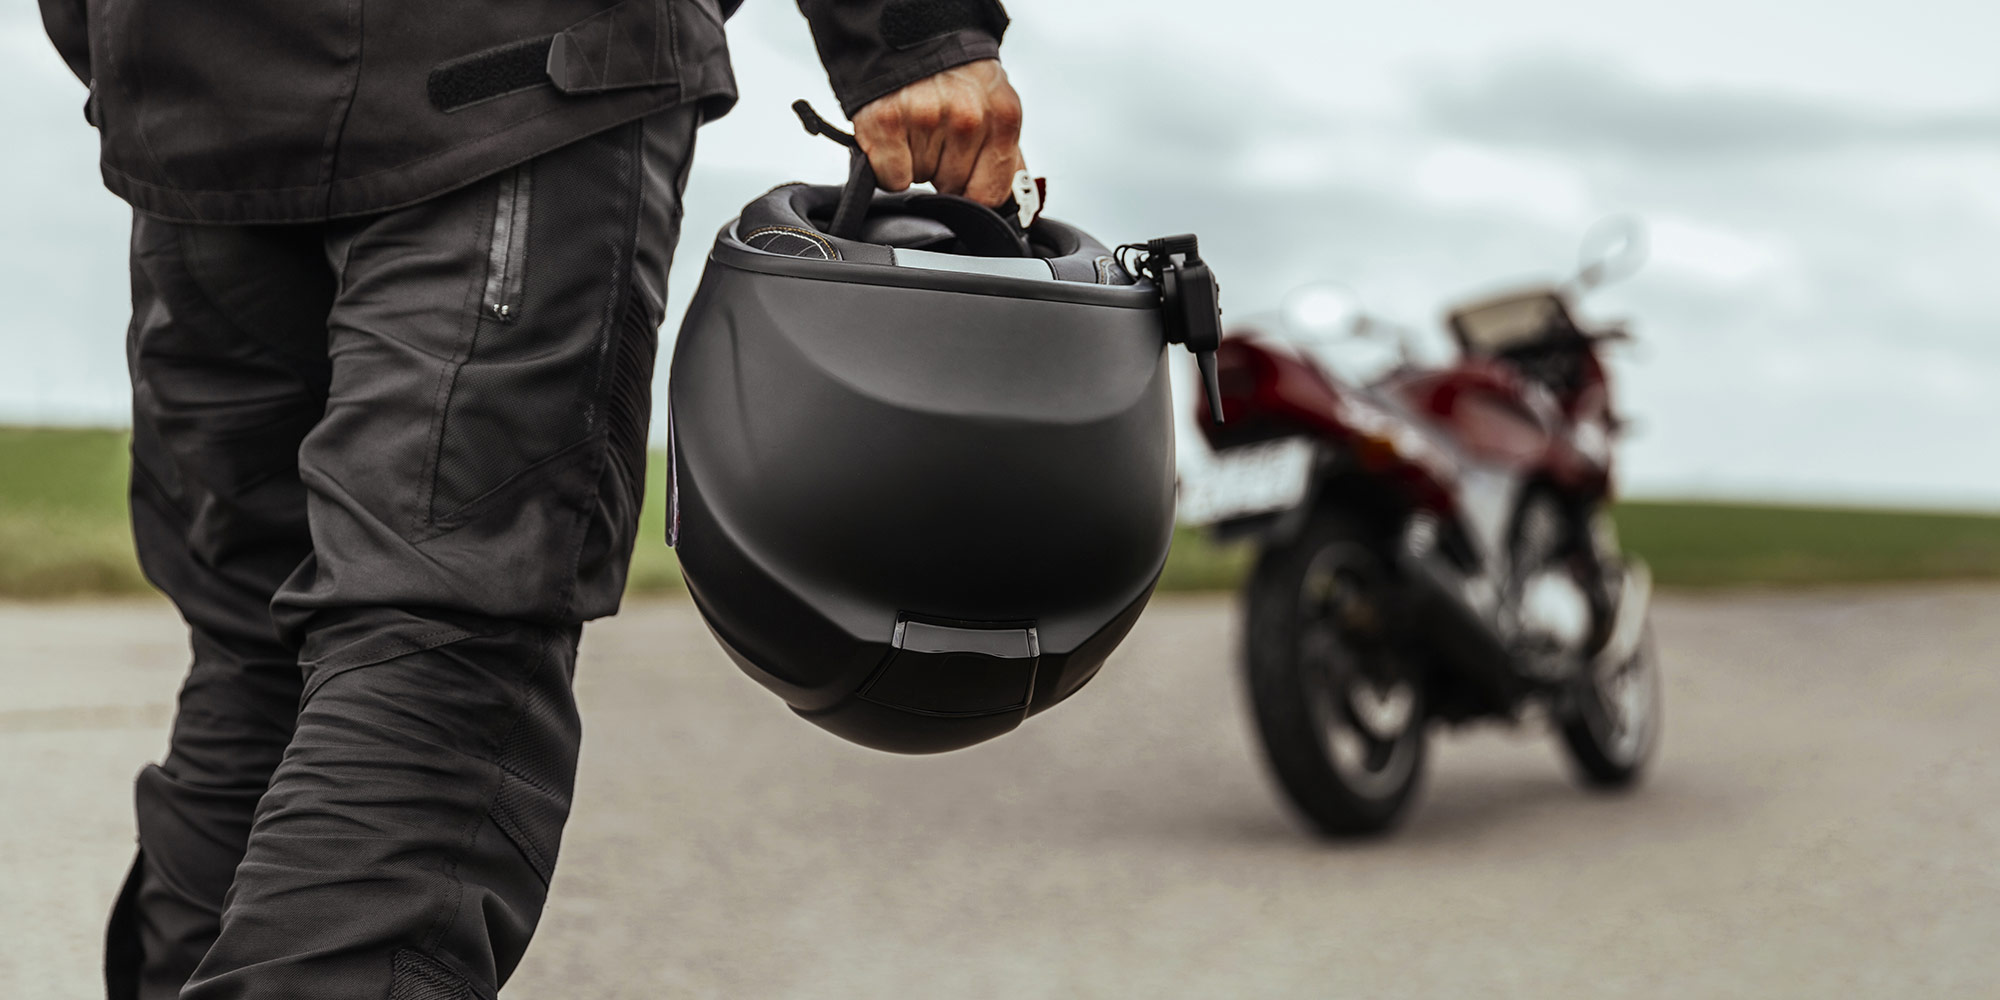 Motorcycle Safety Gear Guide